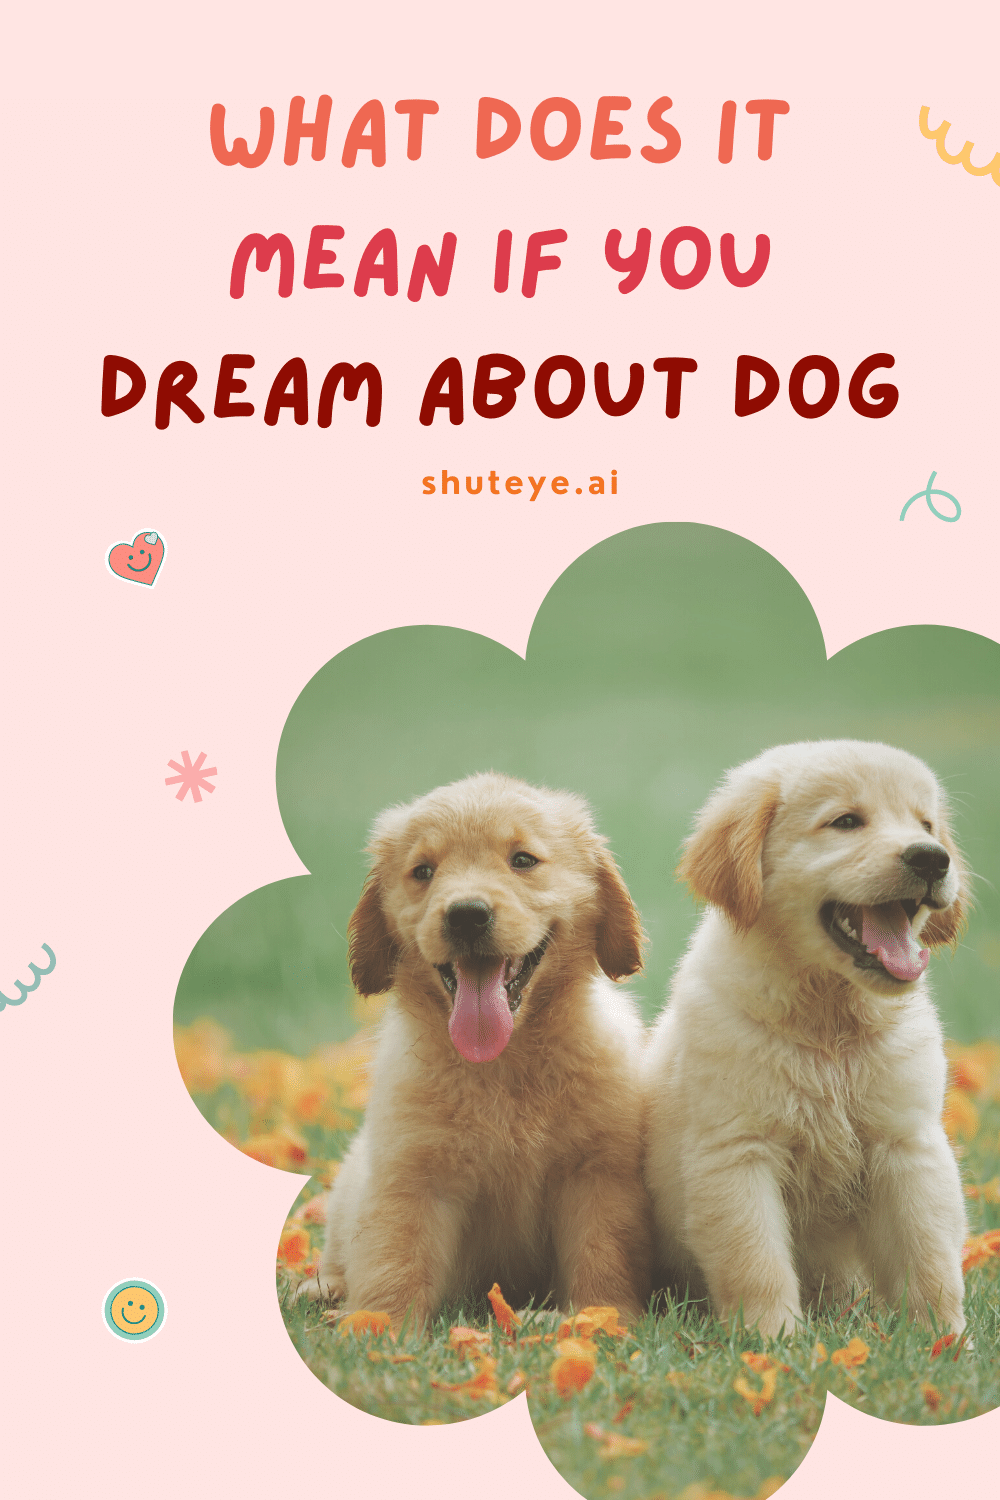 What Does It Mean If You Dream about Dog